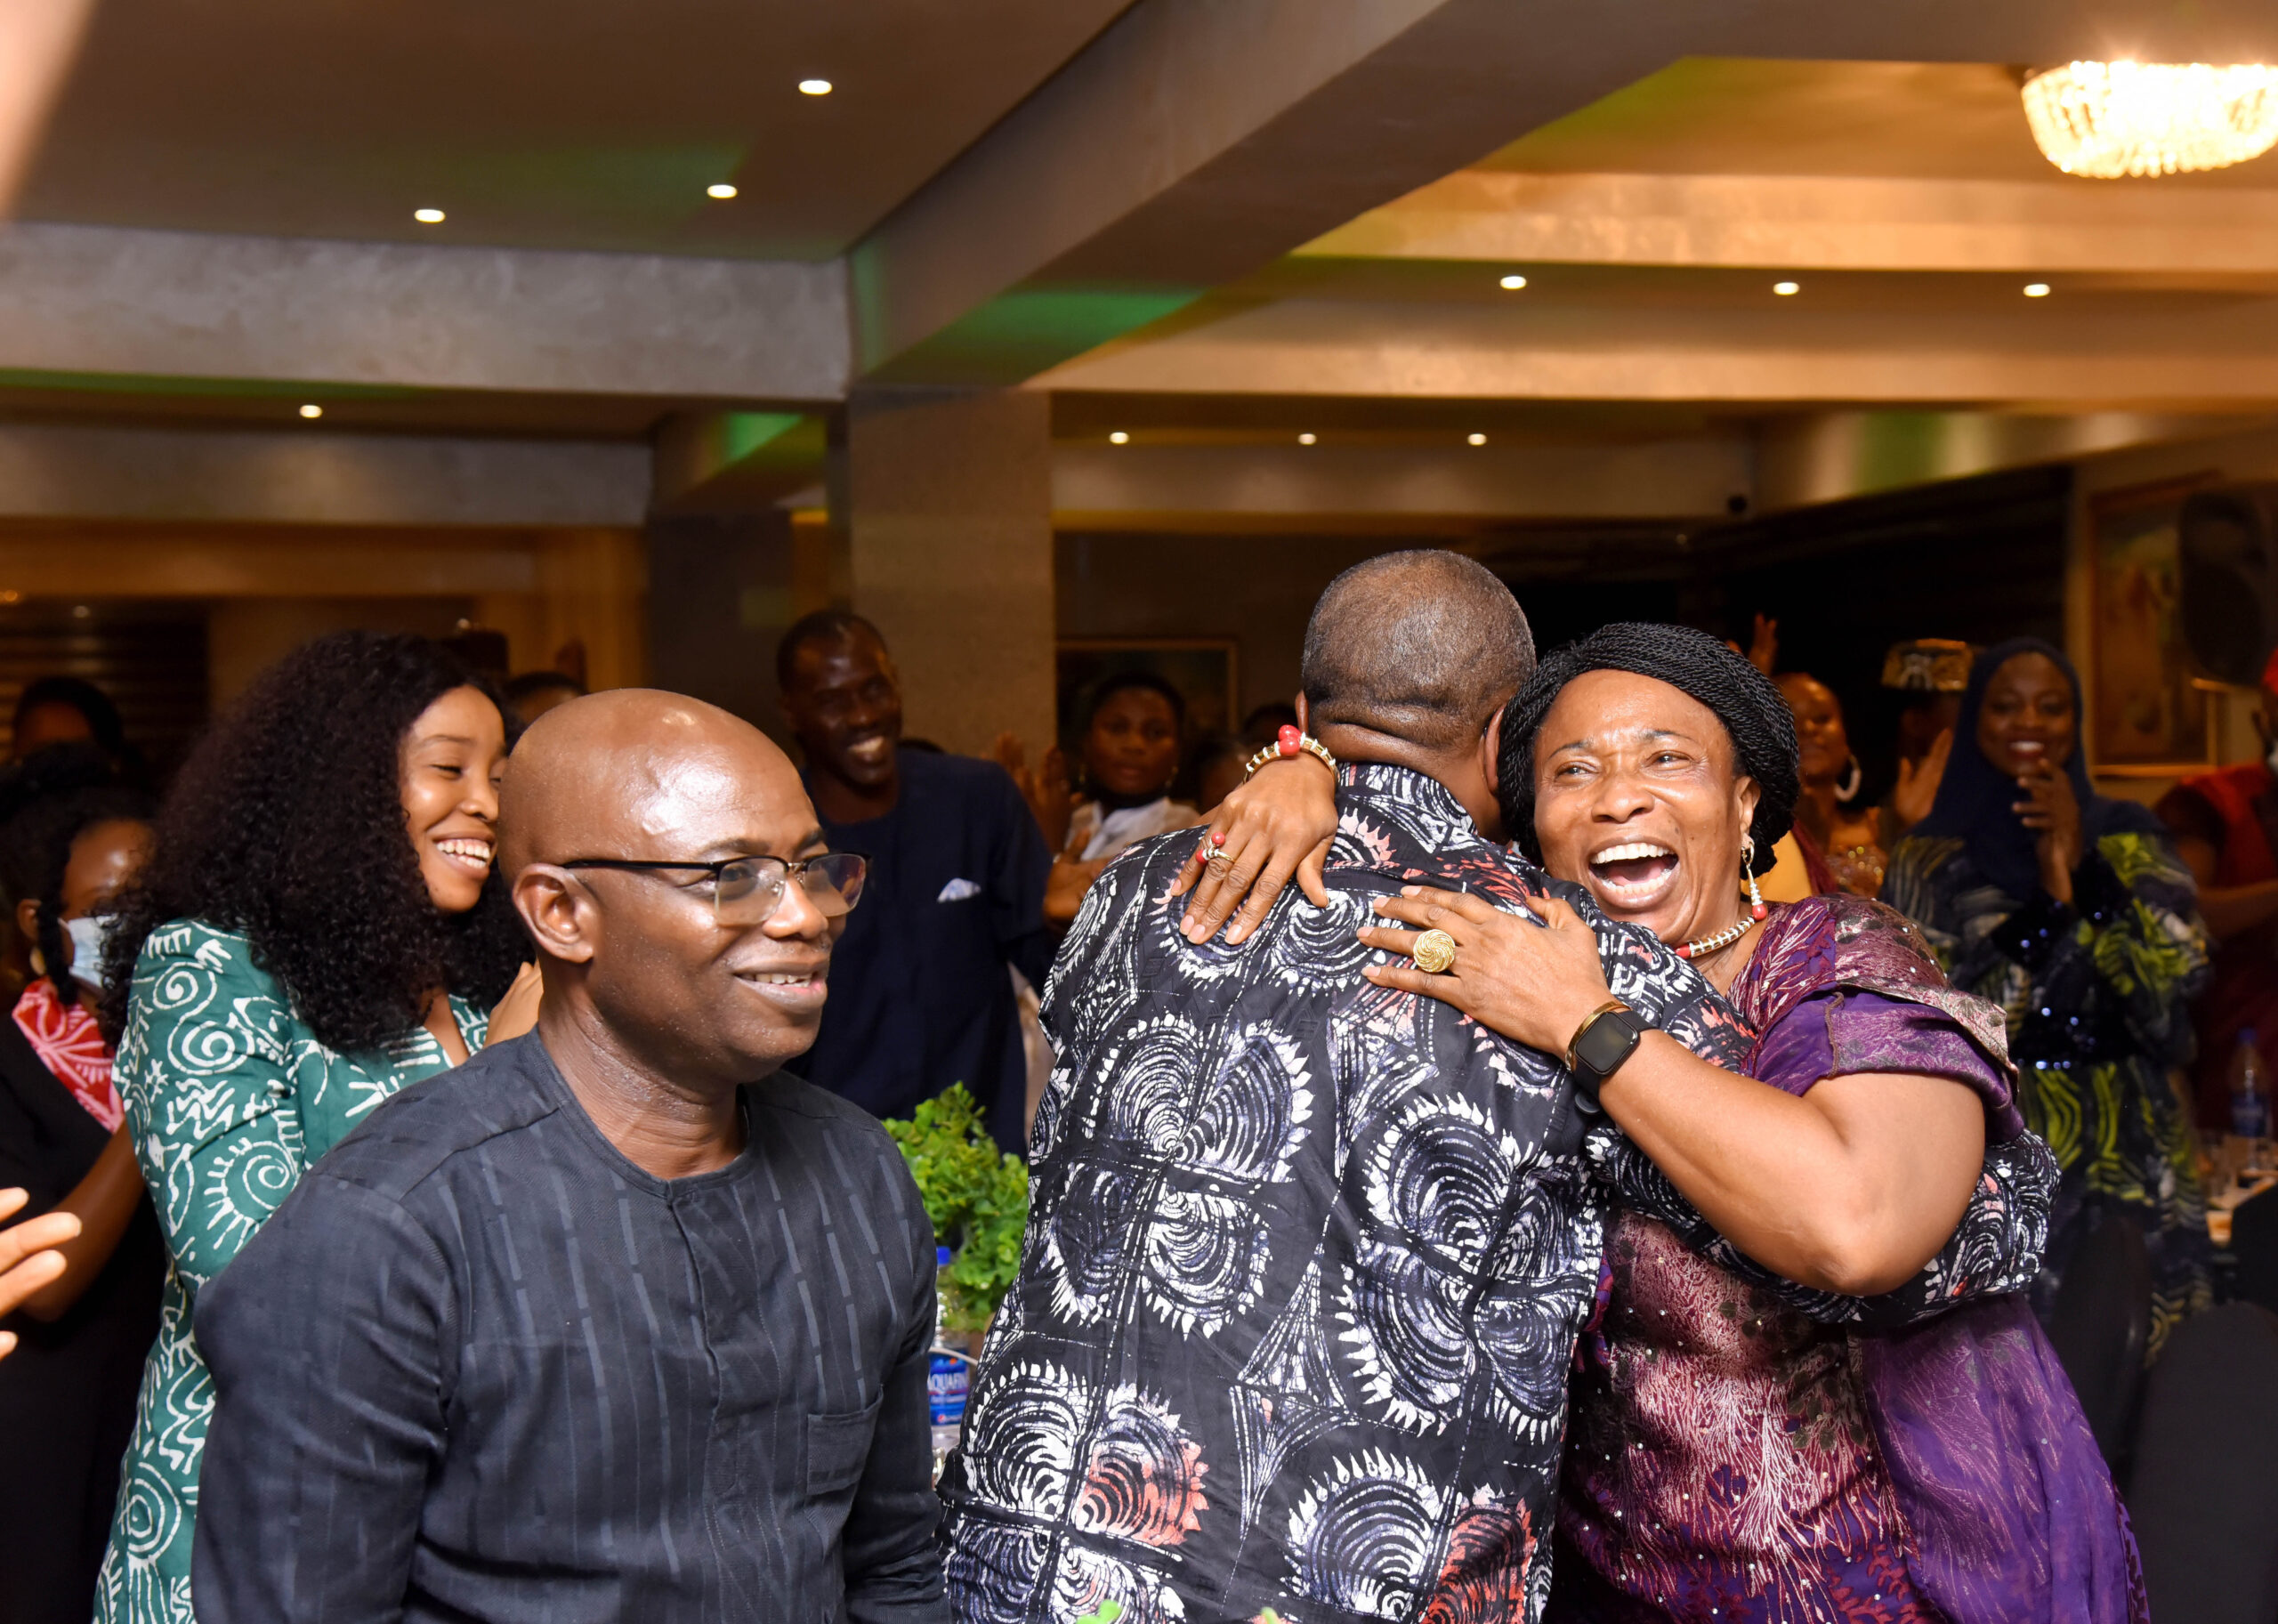 laugh - happy guest -Savouring moments at the ACE Awards 2021